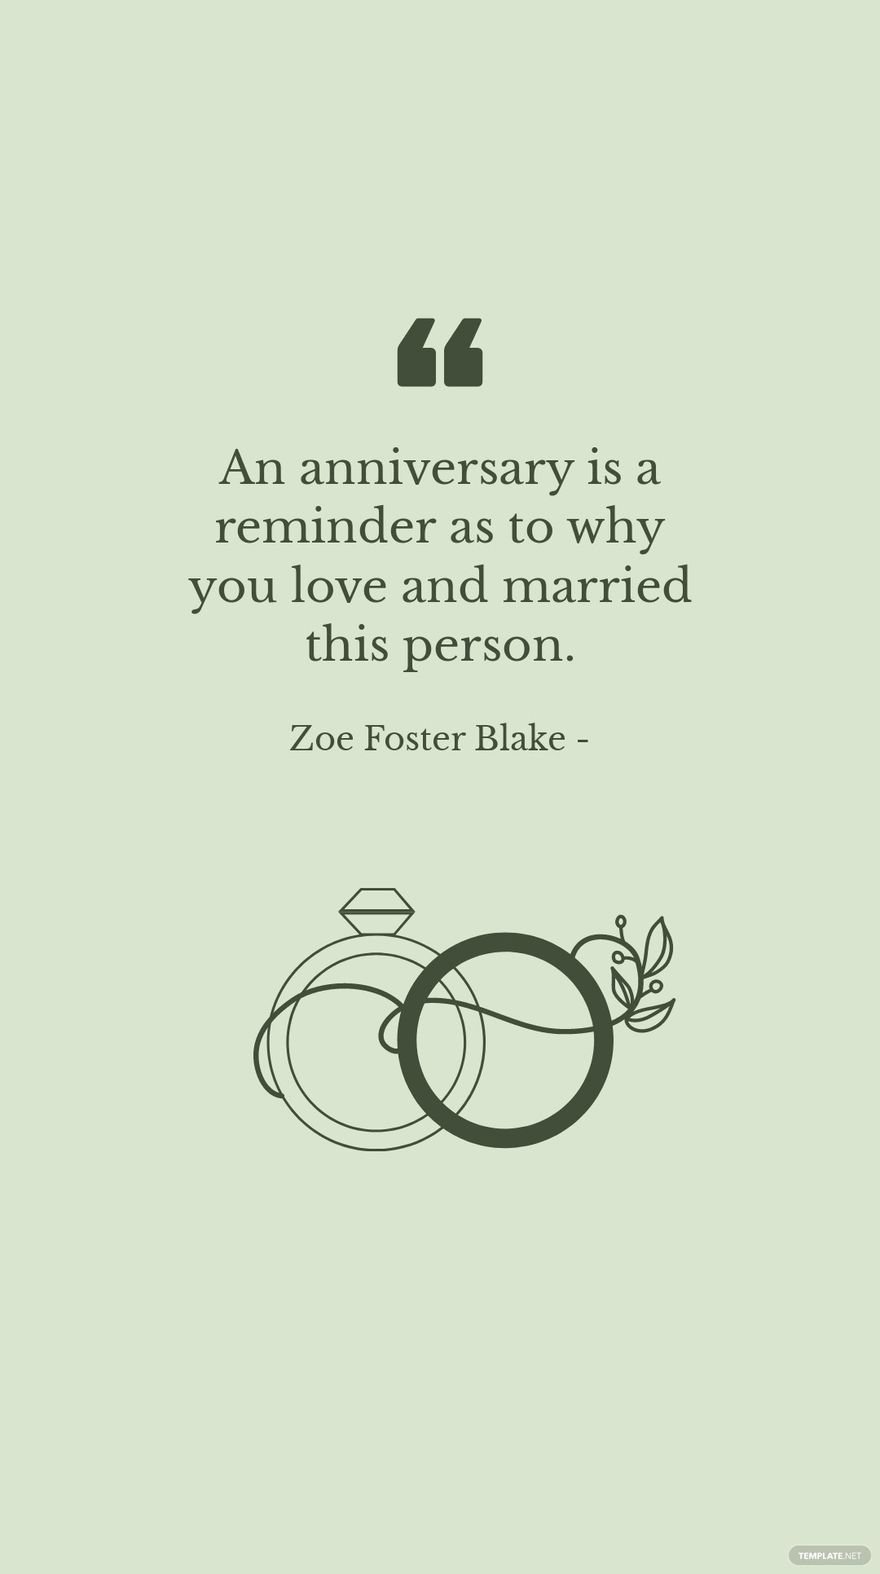 Zoe Foster Blake - An anniversary is a reminder as to why you love and married this person.